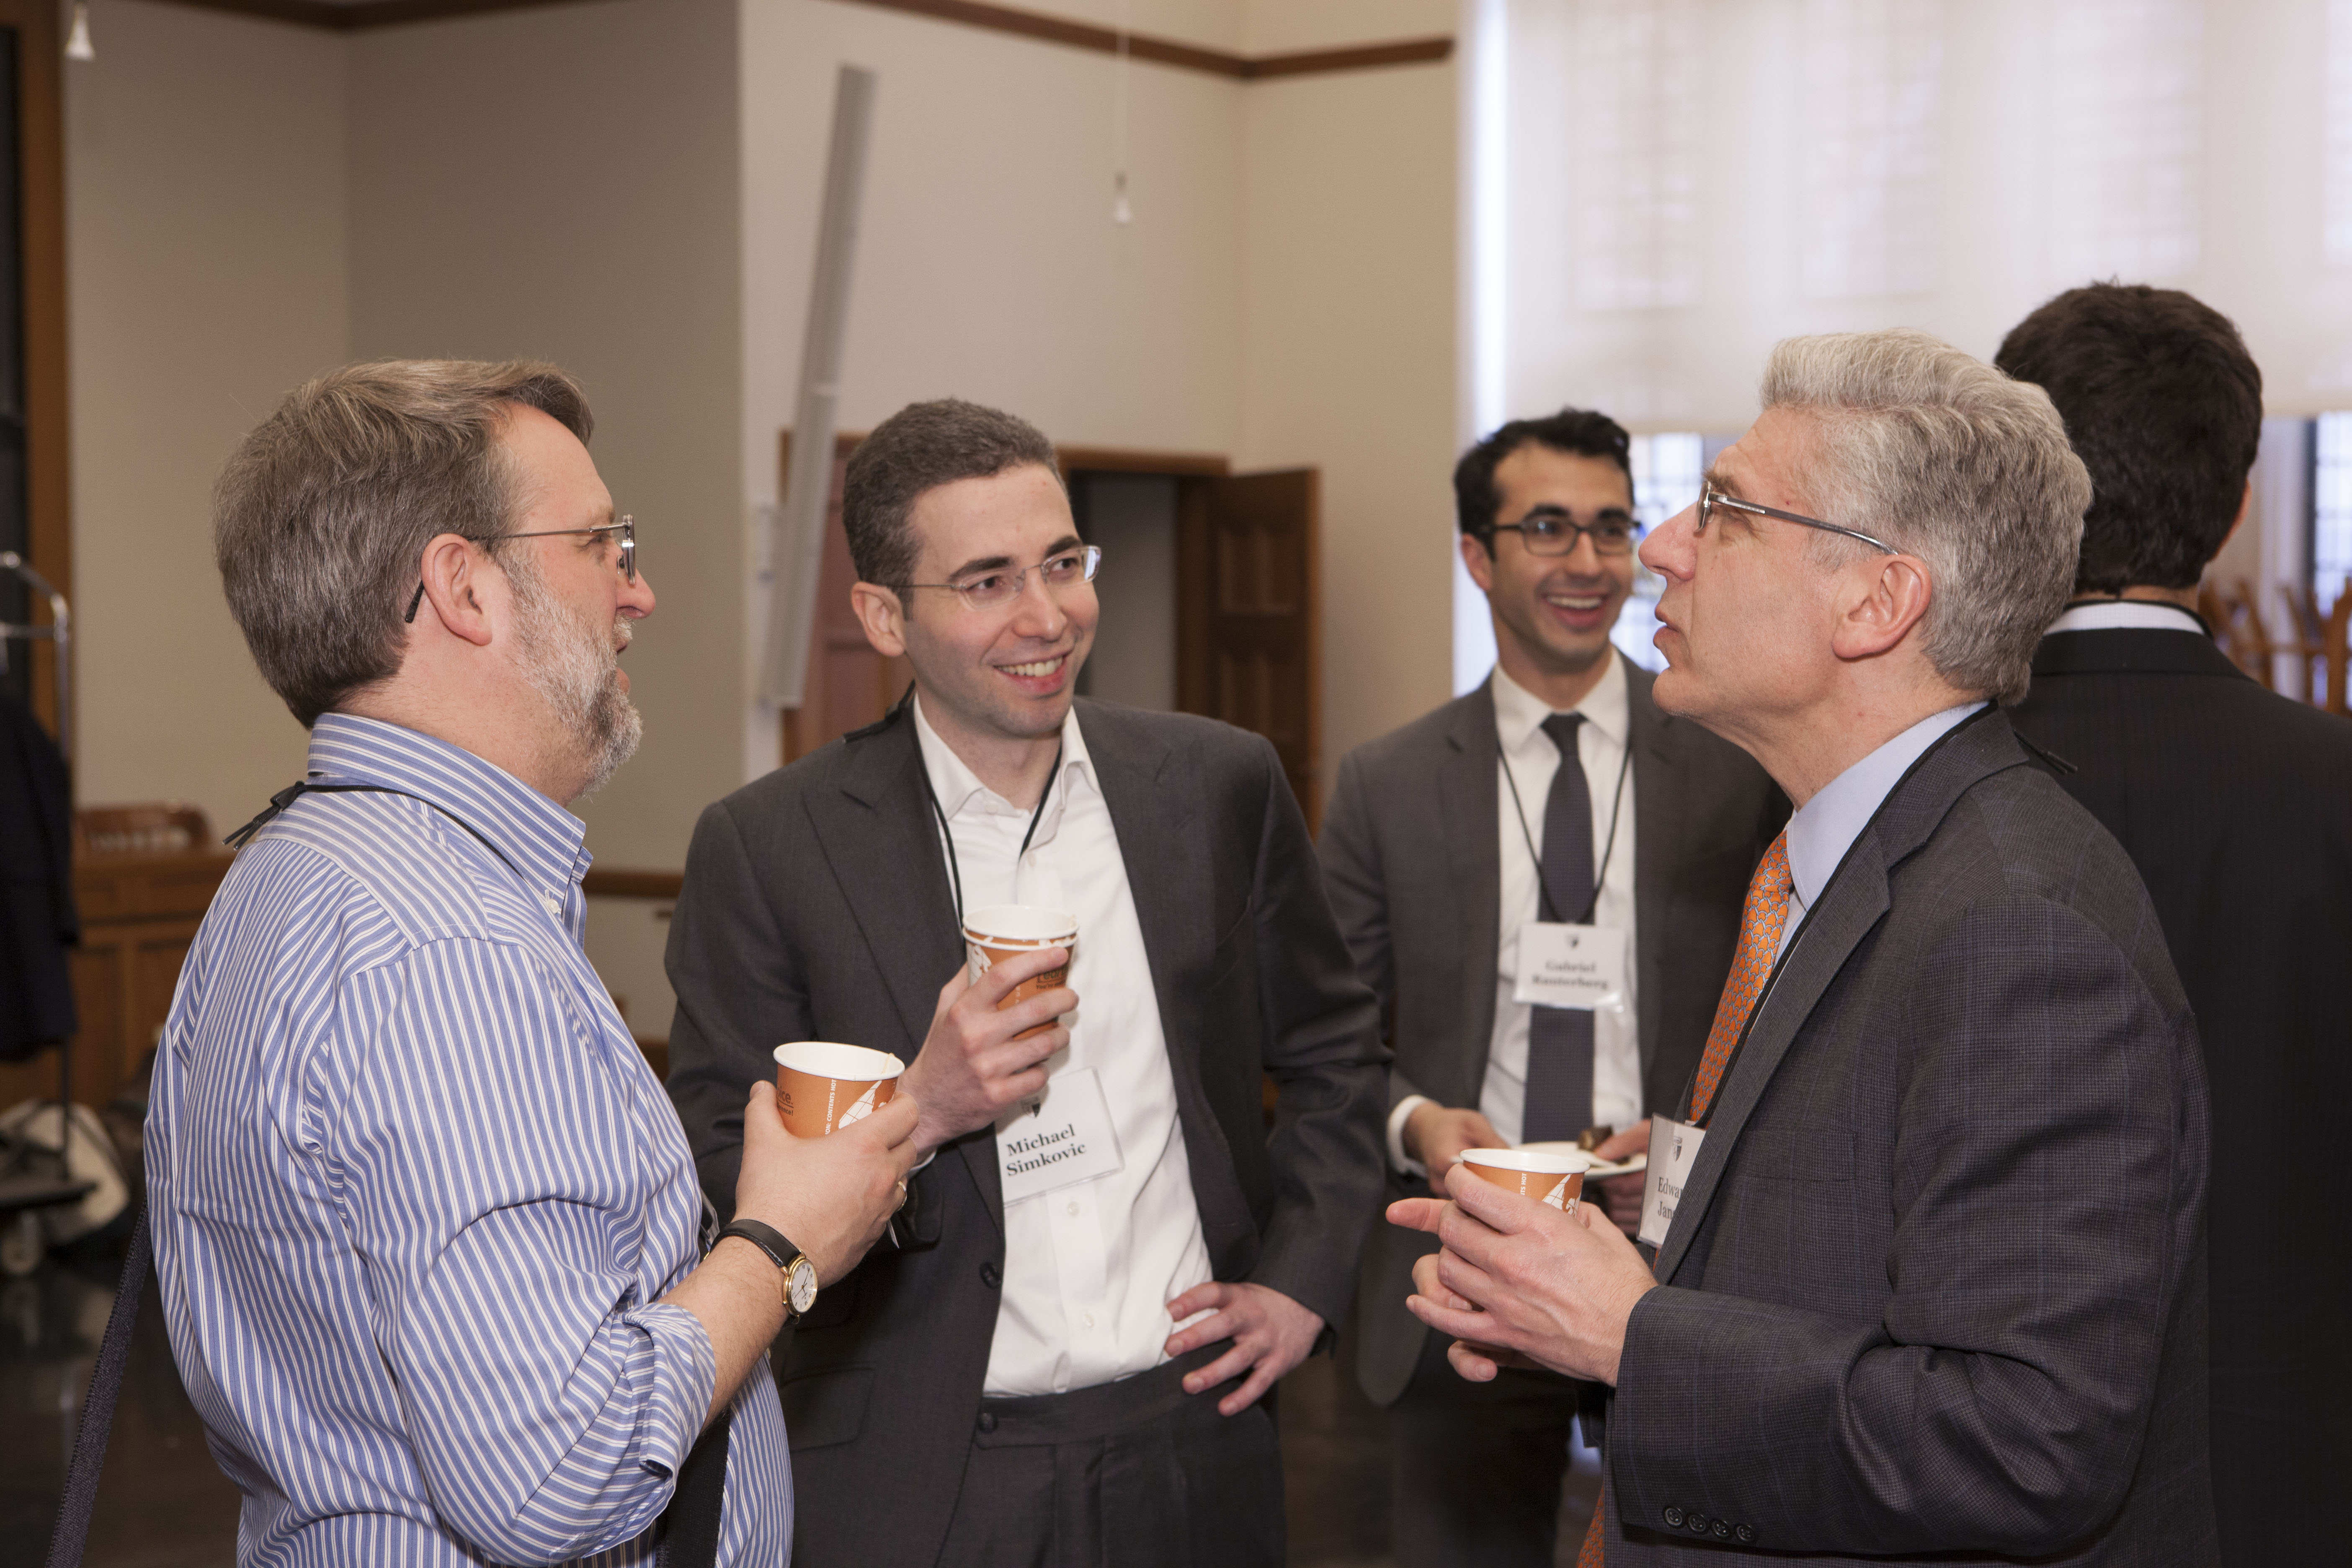 Brooklyn Law Profs. David Reiss and Ted Janger with Seton Hall Law Prof. Michael Simkovic (center)